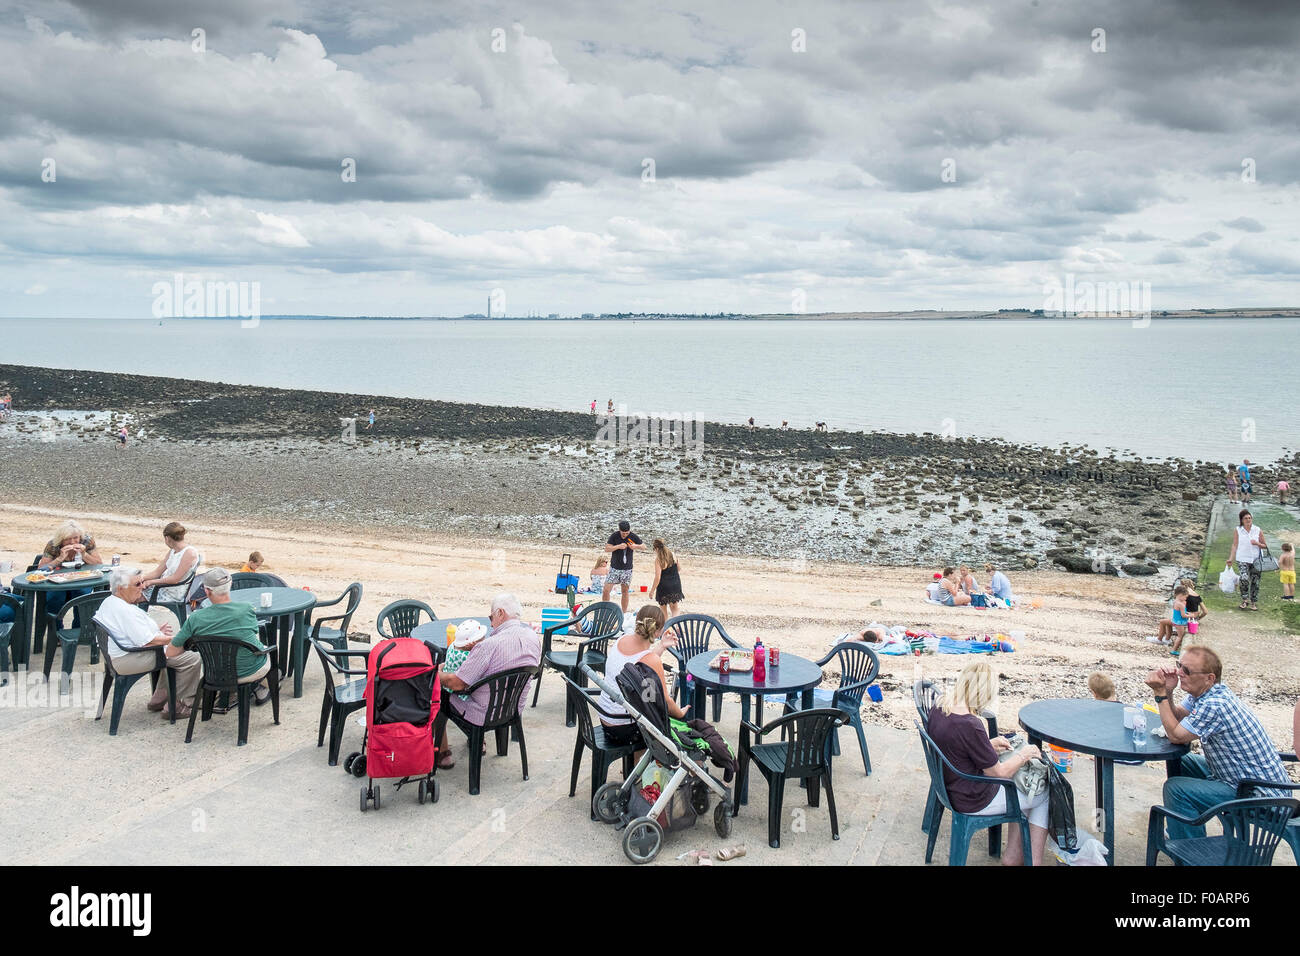 Canvey island - People relaxing at a cafe on Concord beach on Canvey Island, Essex. Stock Photo